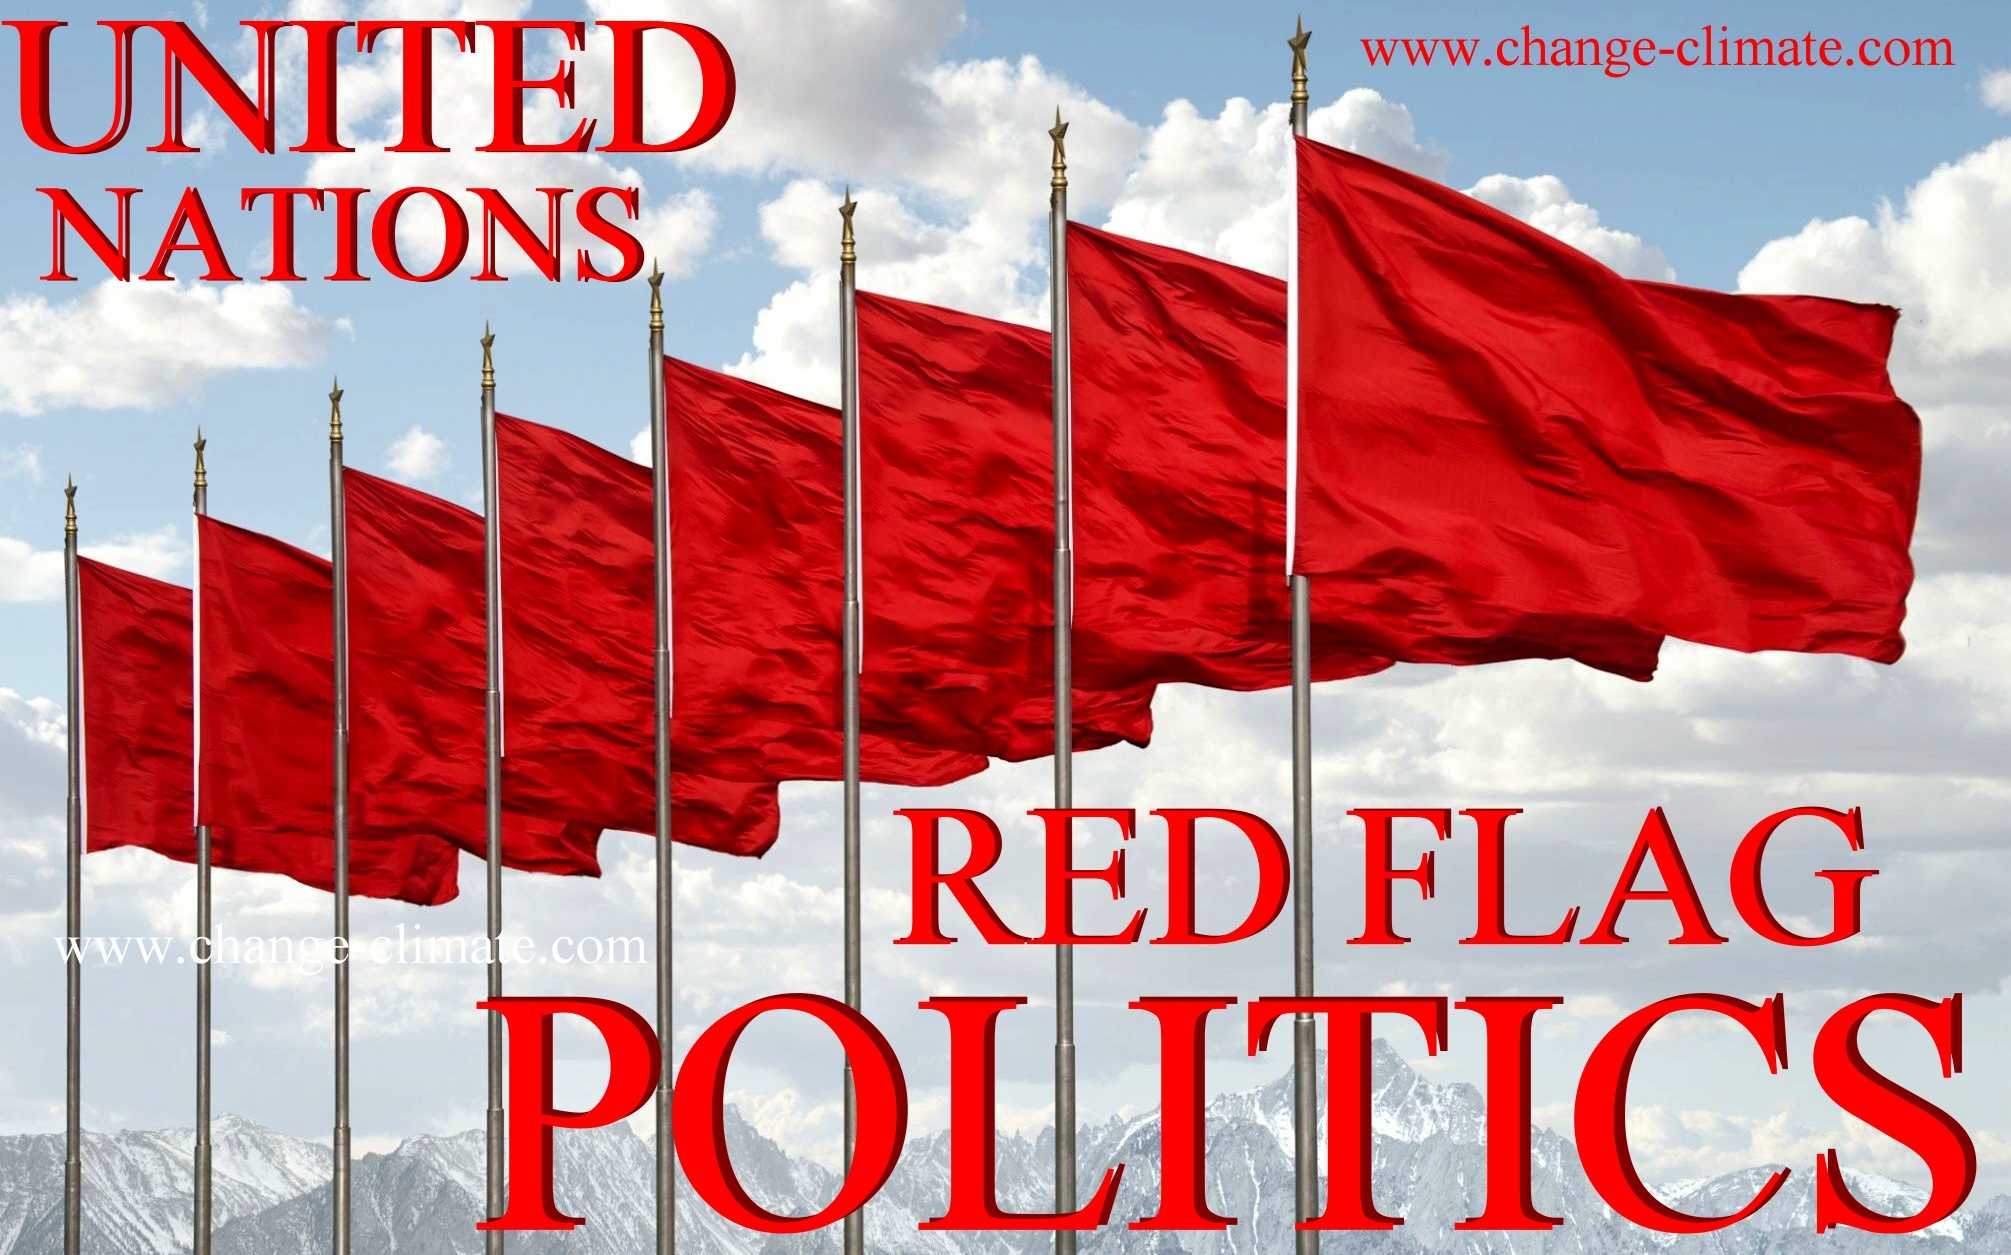 RED FLAG POLITICIANS WILL BE REWARDED WITH A PLACE IN HELL